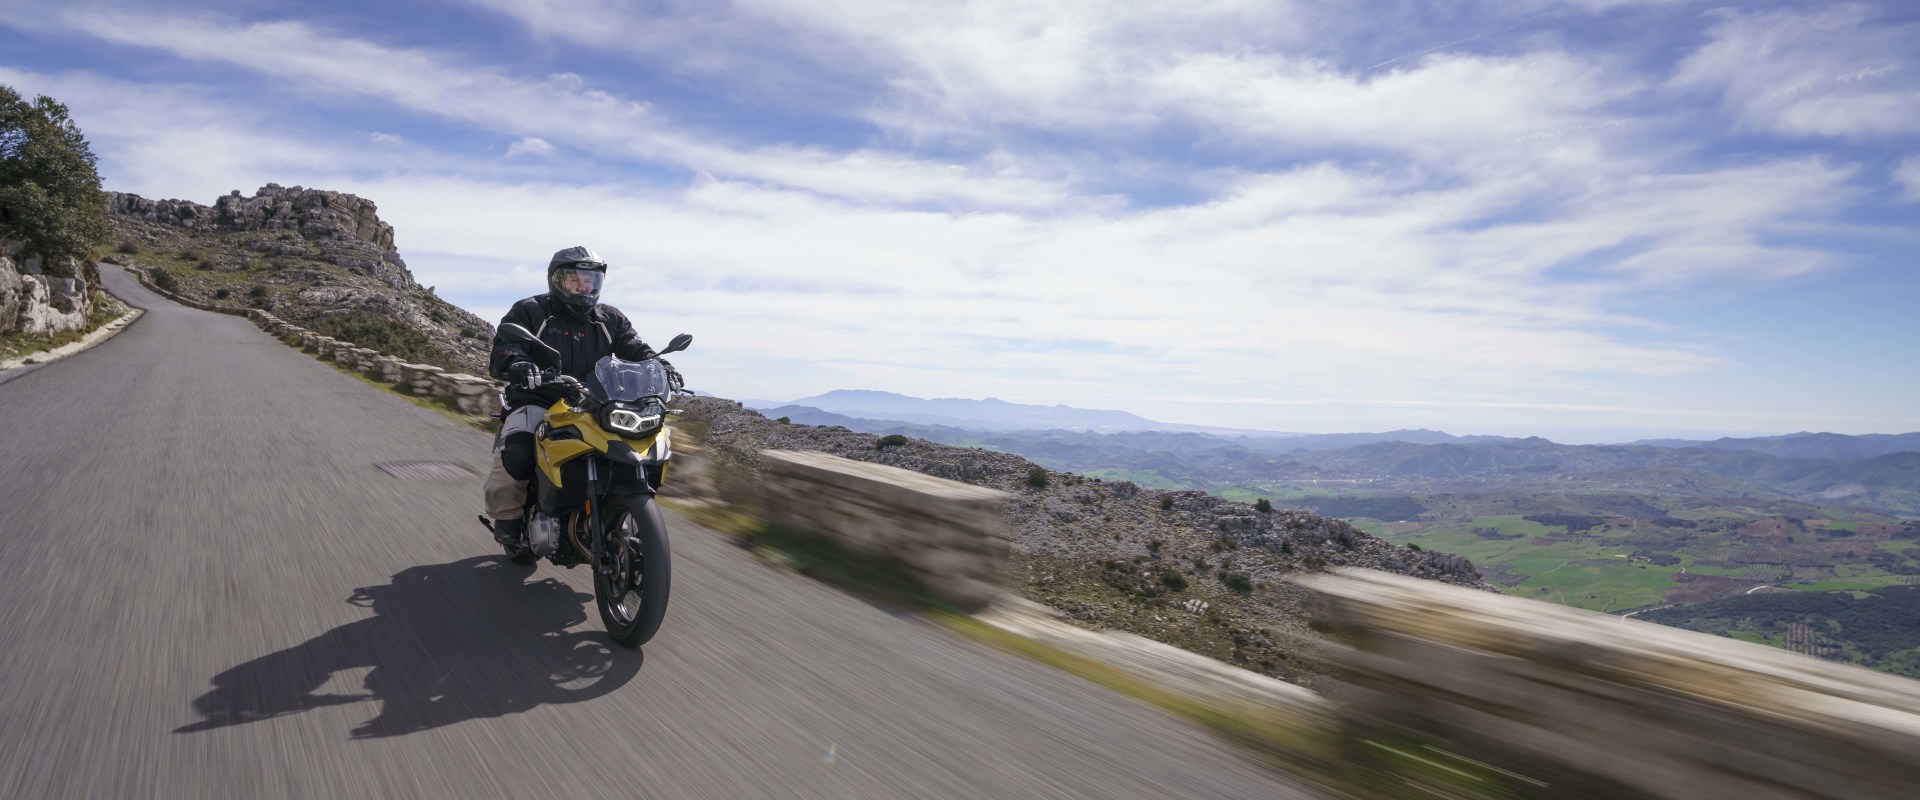 Does Motorcycle Insurance Cover Me When I'm Riding a Rental Bike?